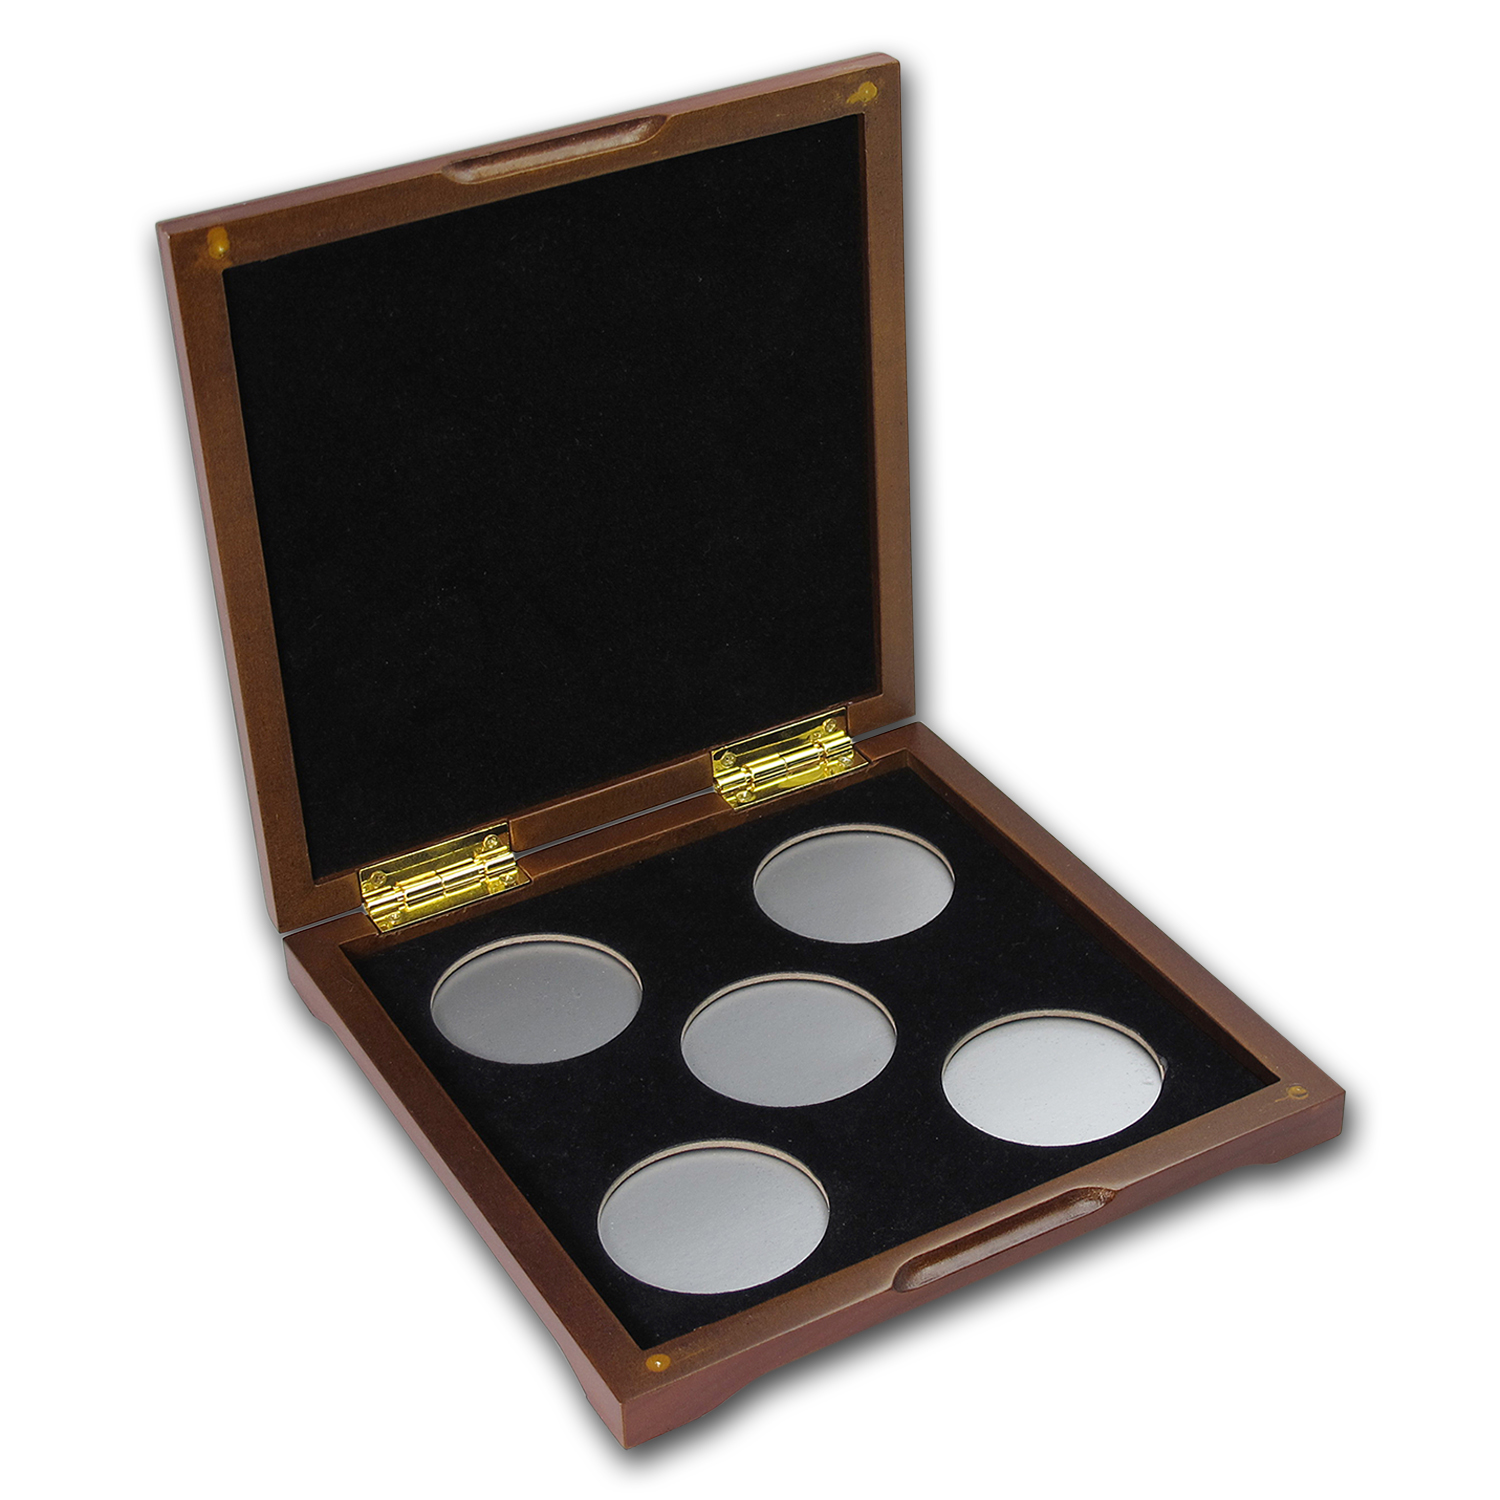 Buy 5 coin Wood Presentation Box - Fits Up to 40 mm